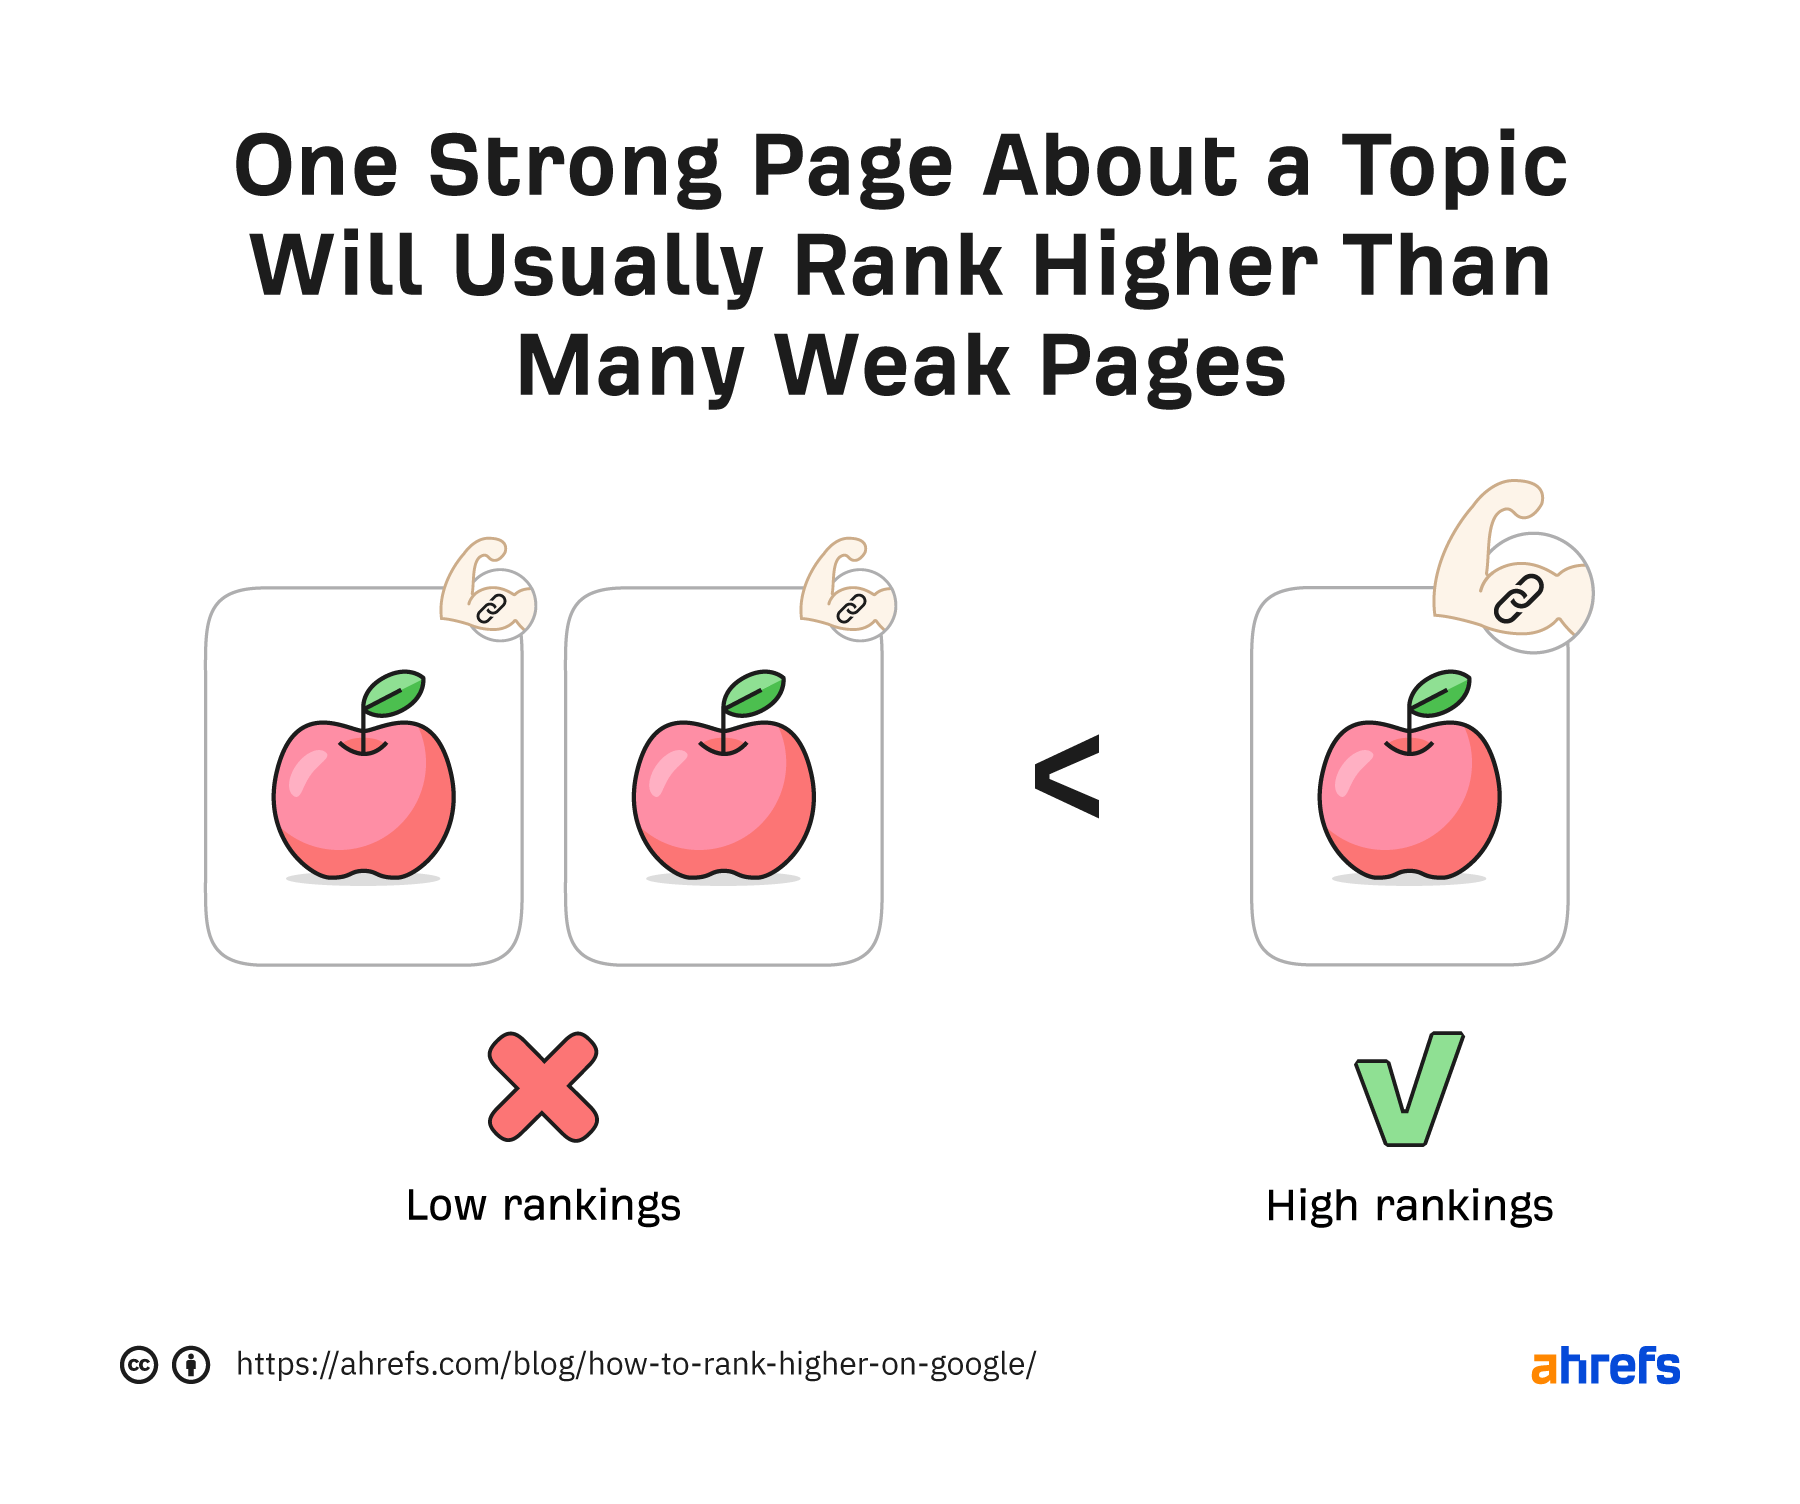 One strong page about a topic will usually rank higher than multiple weak pages about that topic
